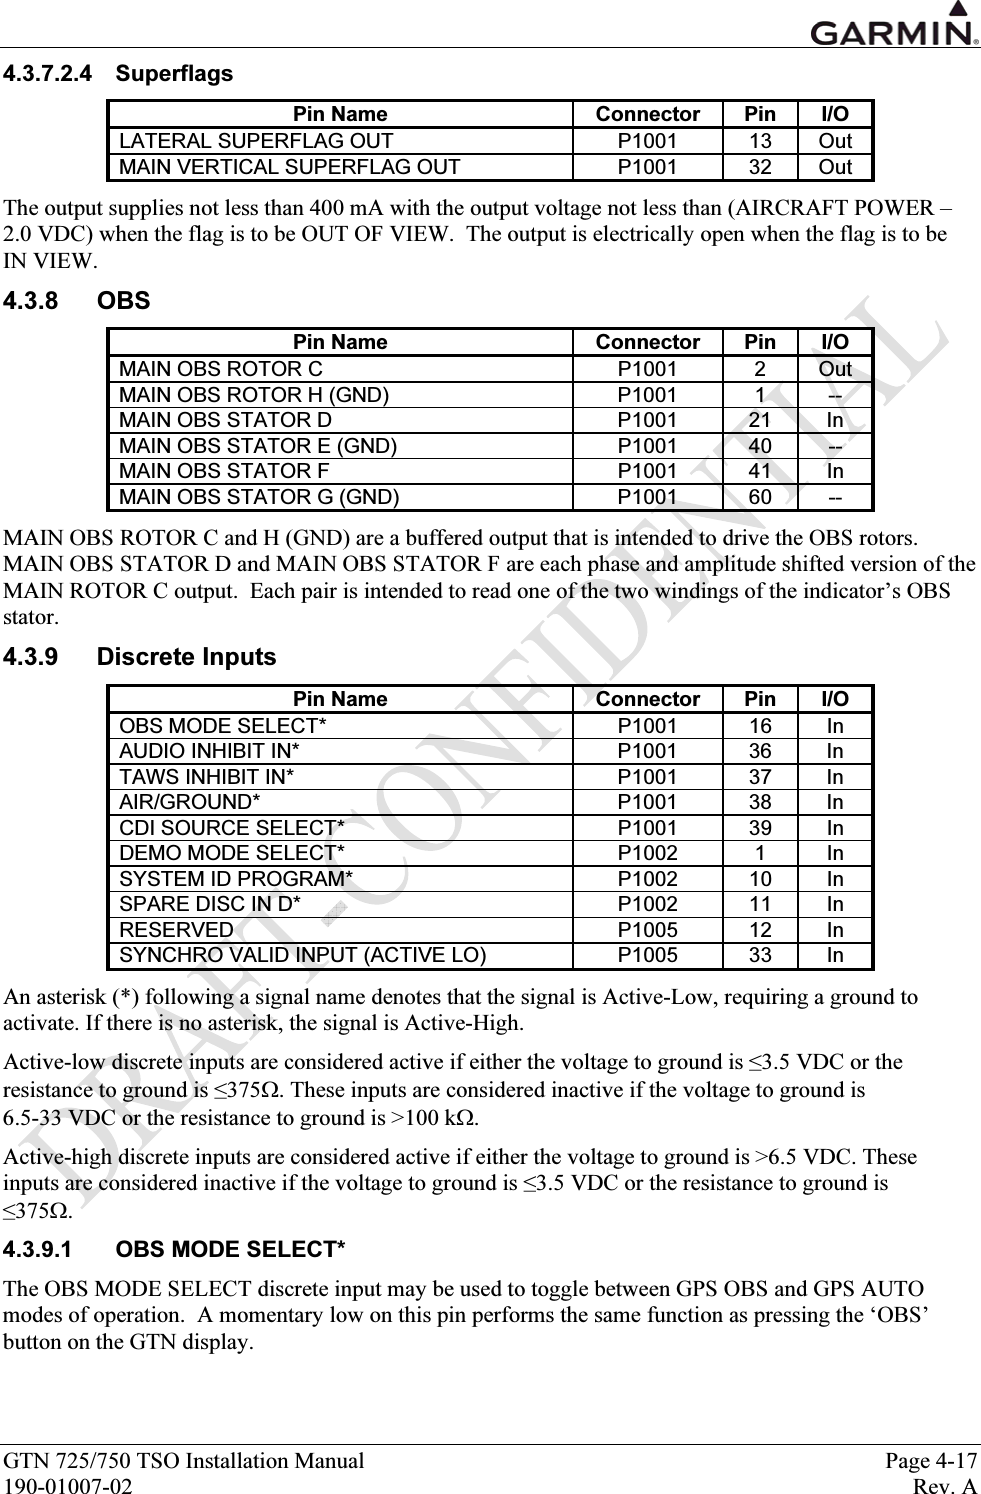  GTN 725/750 TSO Installation Manual  Page 4-17 190-01007-02  Rev. A 4.3.7.2.4 Superflags Pin Name  Connector  Pin  I/O LATERAL SUPERFLAG OUT  P1001  13  Out MAIN VERTICAL SUPERFLAG OUT  P1001  32  Out The output supplies not less than 400 mA with the output voltage not less than (AIRCRAFT POWER –2.0 VDC) when the flag is to be OUT OF VIEW.  The output is electrically open when the flag is to be  IN VIEW. 4.3.8 OBS Pin Name  Connector  Pin  I/O MAIN OBS ROTOR C  P1001  2  Out MAIN OBS ROTOR H (GND)  P1001  1  -- MAIN OBS STATOR D  P1001  21  In MAIN OBS STATOR E (GND)  P1001  40  -- MAIN OBS STATOR F  P1001  41  In MAIN OBS STATOR G (GND)  P1001  60  -- MAIN OBS ROTOR C and H (GND) are a buffered output that is intended to drive the OBS rotors.  MAIN OBS STATOR D and MAIN OBS STATOR F are each phase and amplitude shifted version of the MAIN ROTOR C output.  Each pair is intended to read one of the two windings of the indicator’s OBS stator. 4.3.9 Discrete Inputs Pin Name  Connector  Pin  I/O OBS MODE SELECT*  P1001  16  In AUDIO INHIBIT IN*  P1001  36  In TAWS INHIBIT IN*  P1001  37  In AIR/GROUND* P1001 38 In CDI SOURCE SELECT*  P1001  39  In DEMO MODE SELECT*  P1002  1  In SYSTEM ID PROGRAM*  P1002  10  In SPARE DISC IN D*  P1002  11  In RESERVED   P1005  12  In SYNCHRO VALID INPUT (ACTIVE LO)   P1005  33  In An asterisk (*) following a signal name denotes that the signal is Active-Low, requiring a ground to activate. If there is no asterisk, the signal is Active-High. Active-low discrete inputs are considered active if either the voltage to ground is ≤3.5 VDC or the resistance to ground is ≤375Ω. These inputs are considered inactive if the voltage to ground is  6.5-33 VDC or the resistance to ground is &gt;100 kΩ. Active-high discrete inputs are considered active if either the voltage to ground is &gt;6.5 VDC. These inputs are considered inactive if the voltage to ground is ≤3.5 VDC or the resistance to ground is  ≤375Ω. 4.3.9.1 OBS MODE SELECT* The OBS MODE SELECT discrete input may be used to toggle between GPS OBS and GPS AUTO modes of operation.  A momentary low on this pin performs the same function as pressing the ‘OBS’ button on the GTN display. 